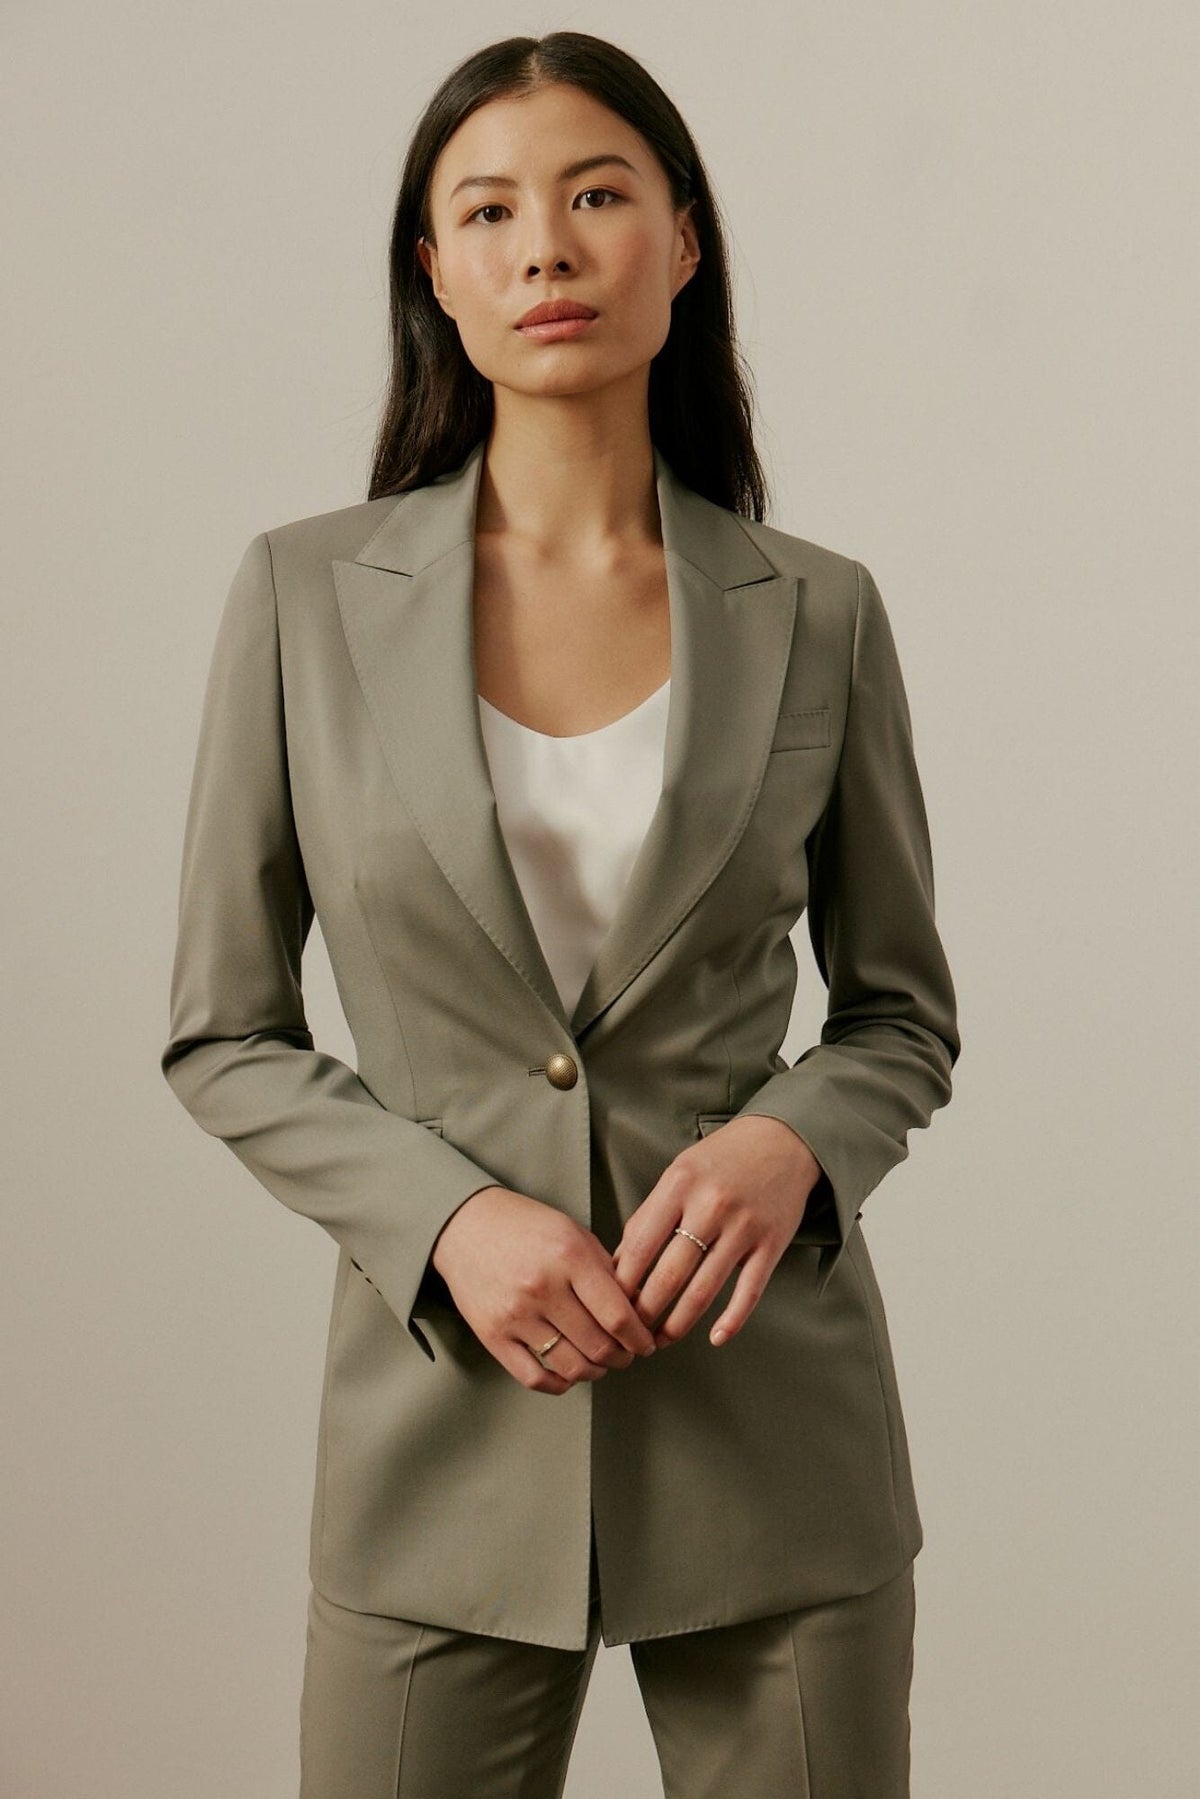 Shop Womens Suits, Jackets and Trousers Online in Australia